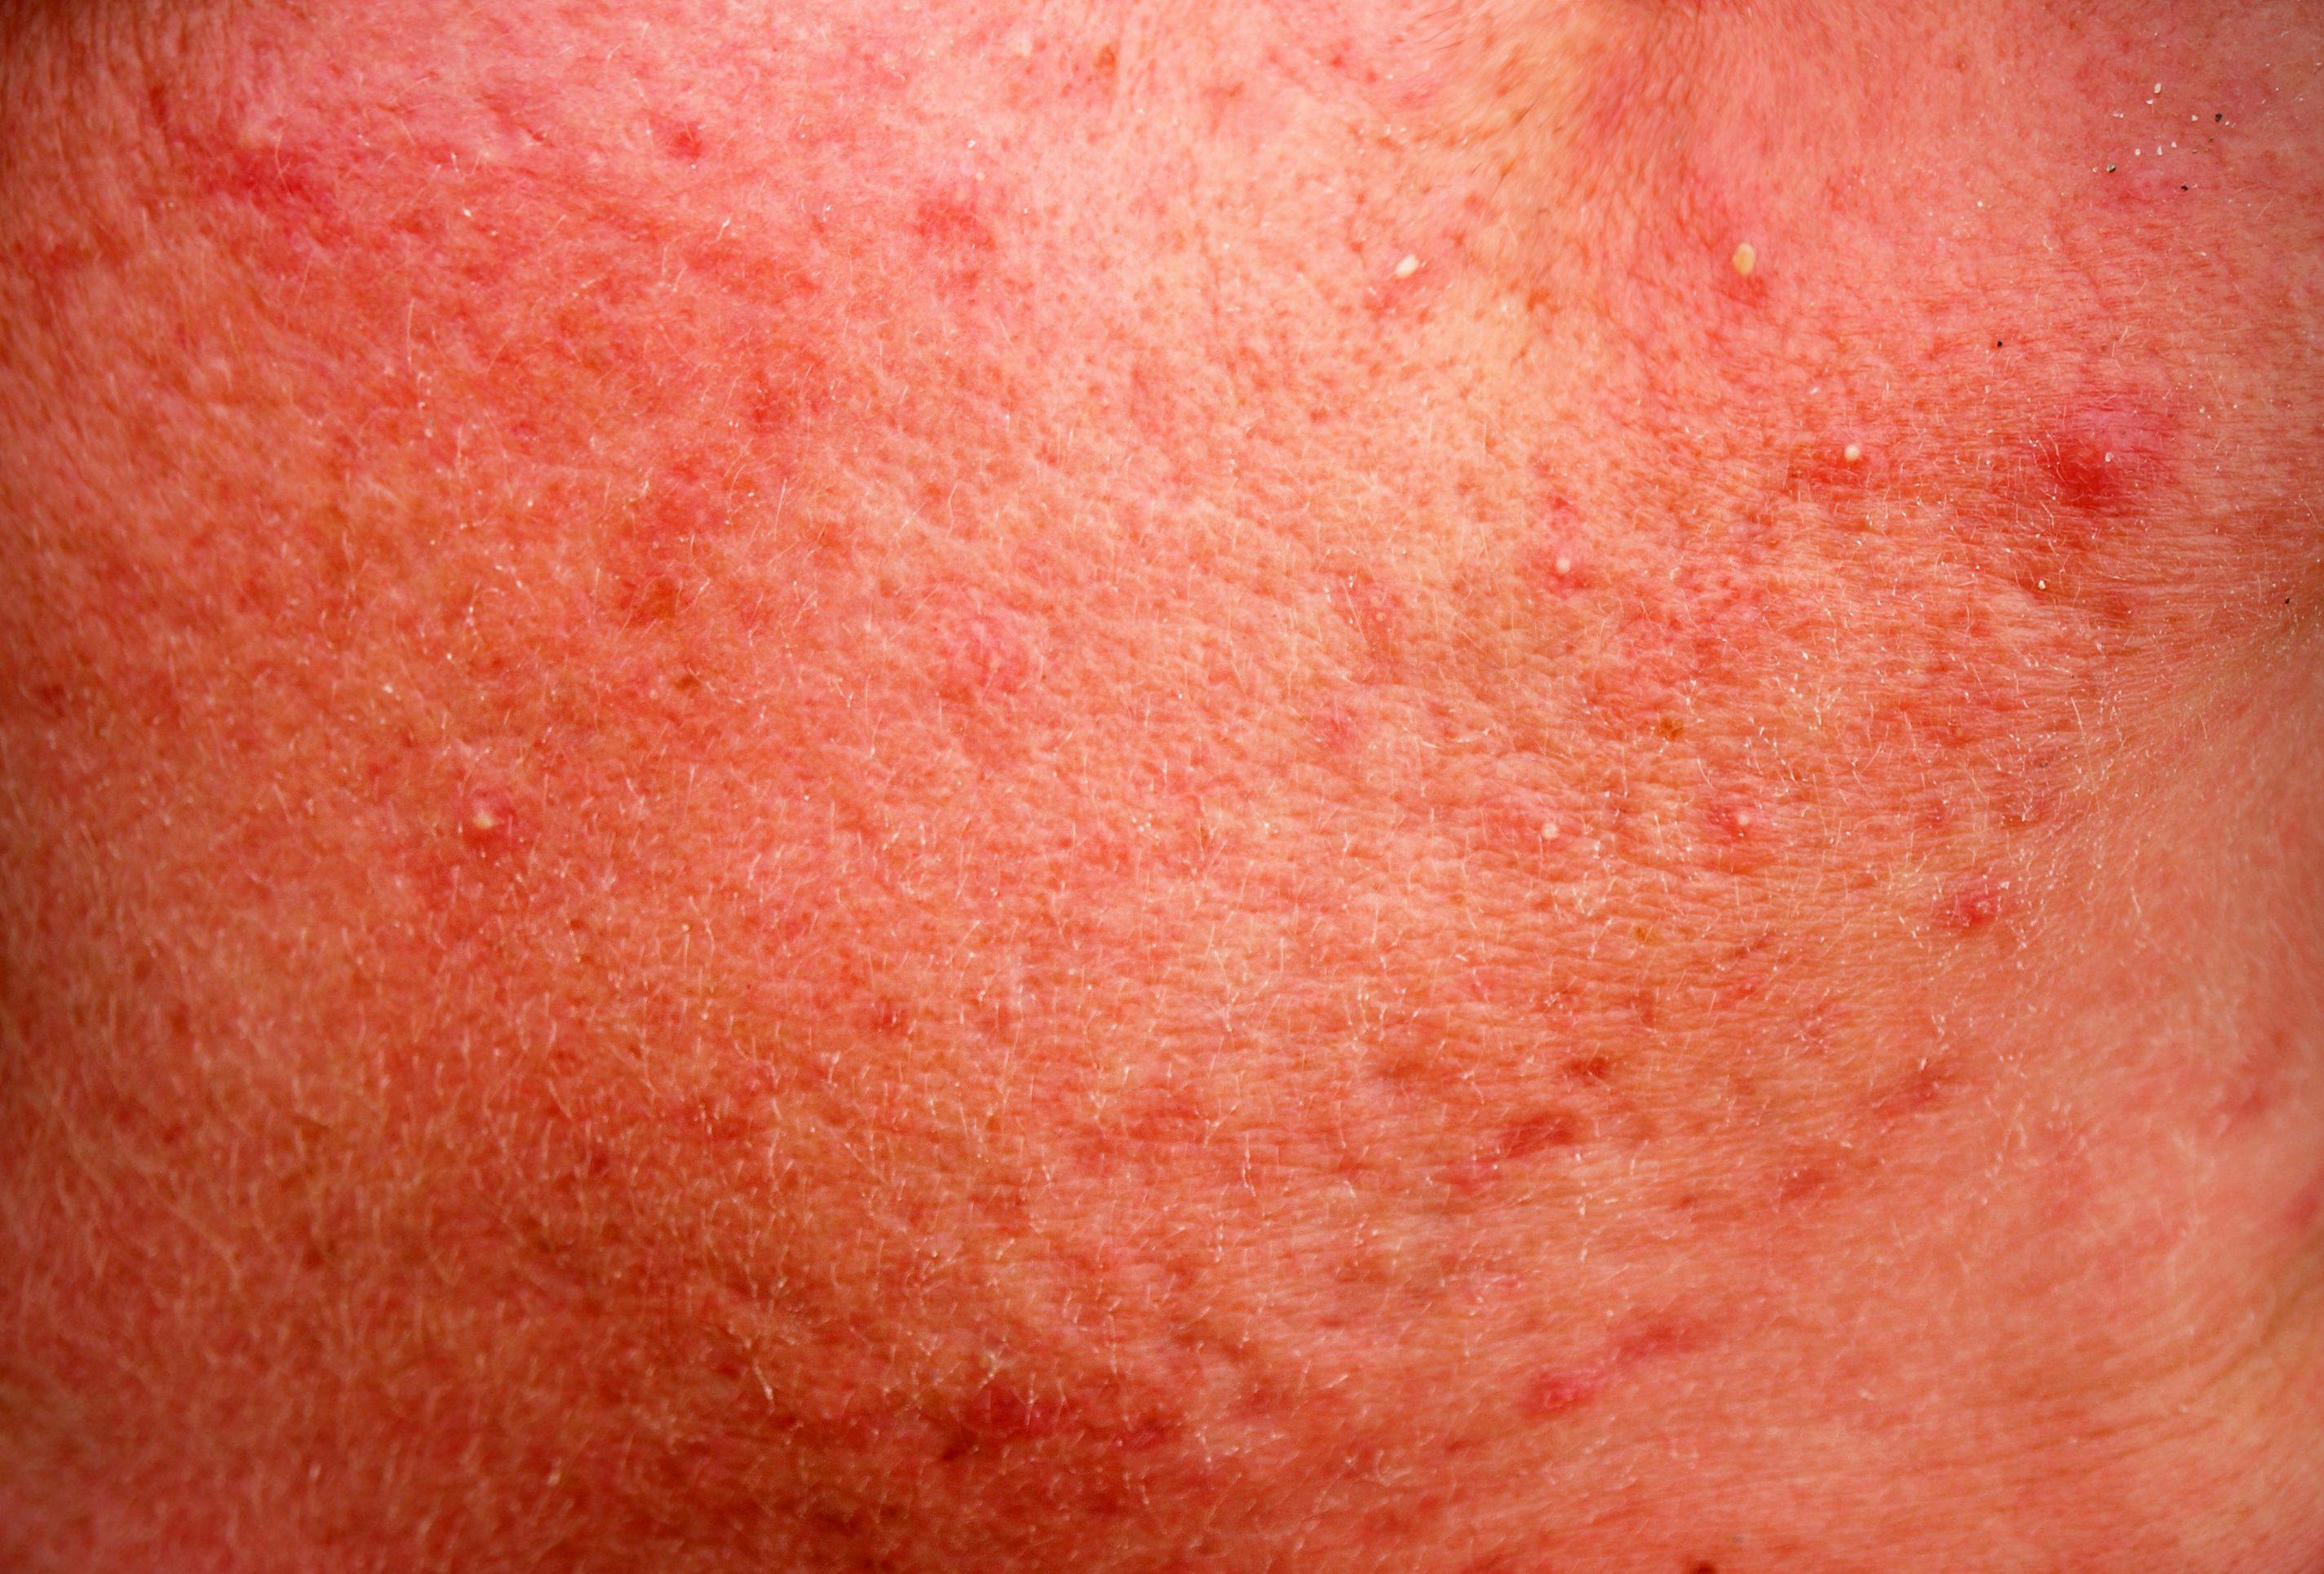 Topical minocycline for rosacea now available